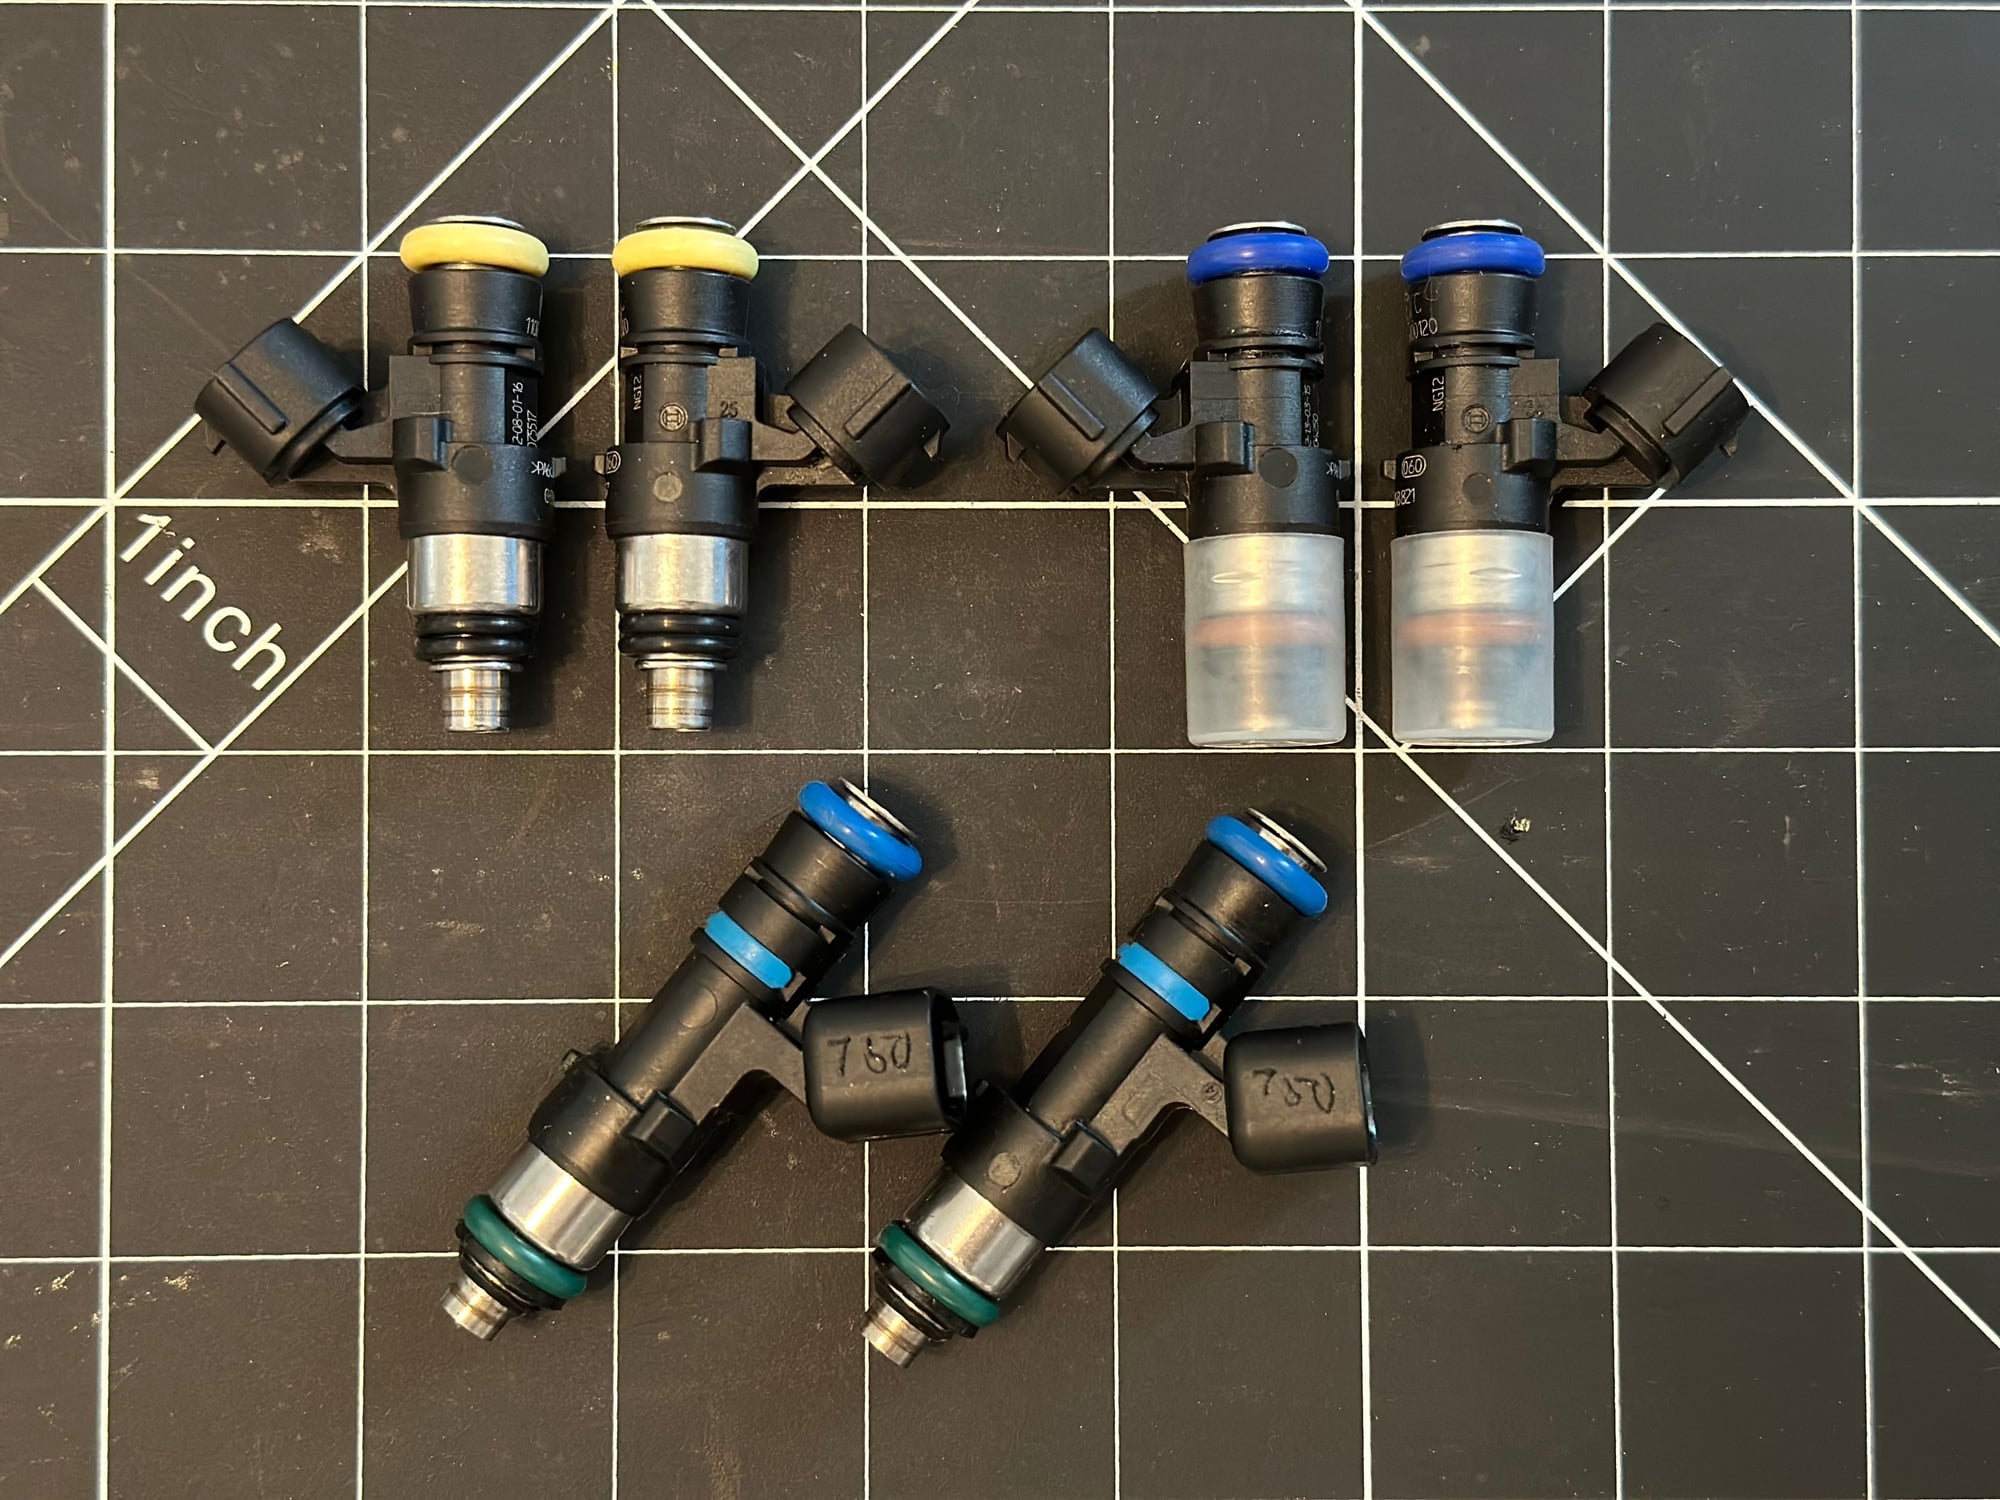 Engine - Intake/Fuel - Aeromotive FPR and Bosch Injectors - Used - 1985 to 2002 Mazda RX-7 - Chicago, IL 60605, United States